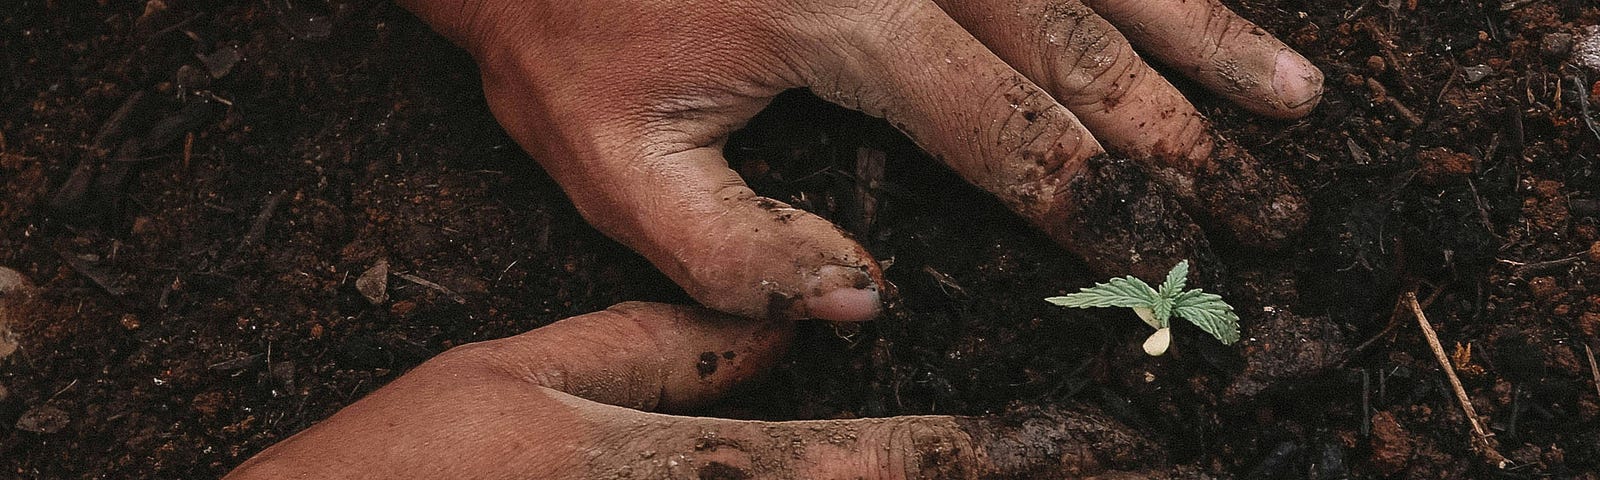 Photo of hands planting